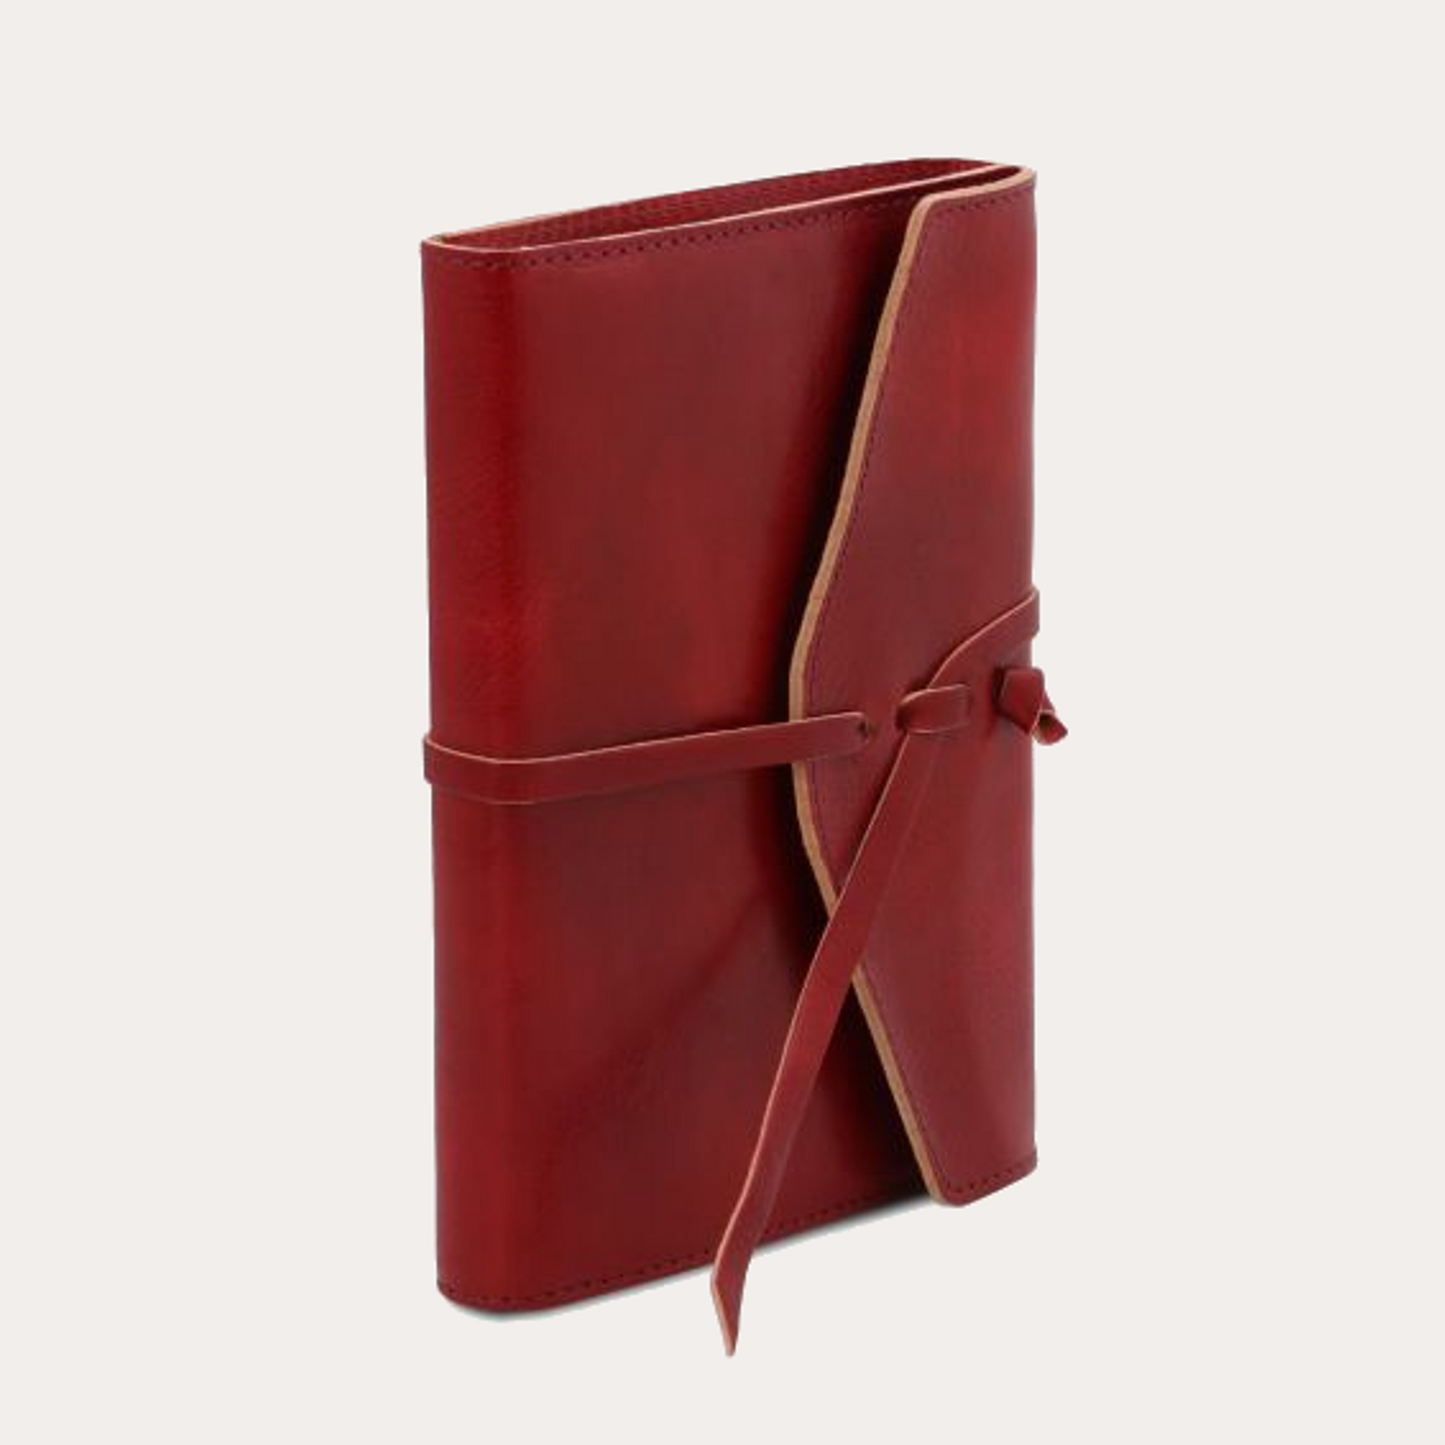 Tuscany Leather Red Leather Journal / Notebook